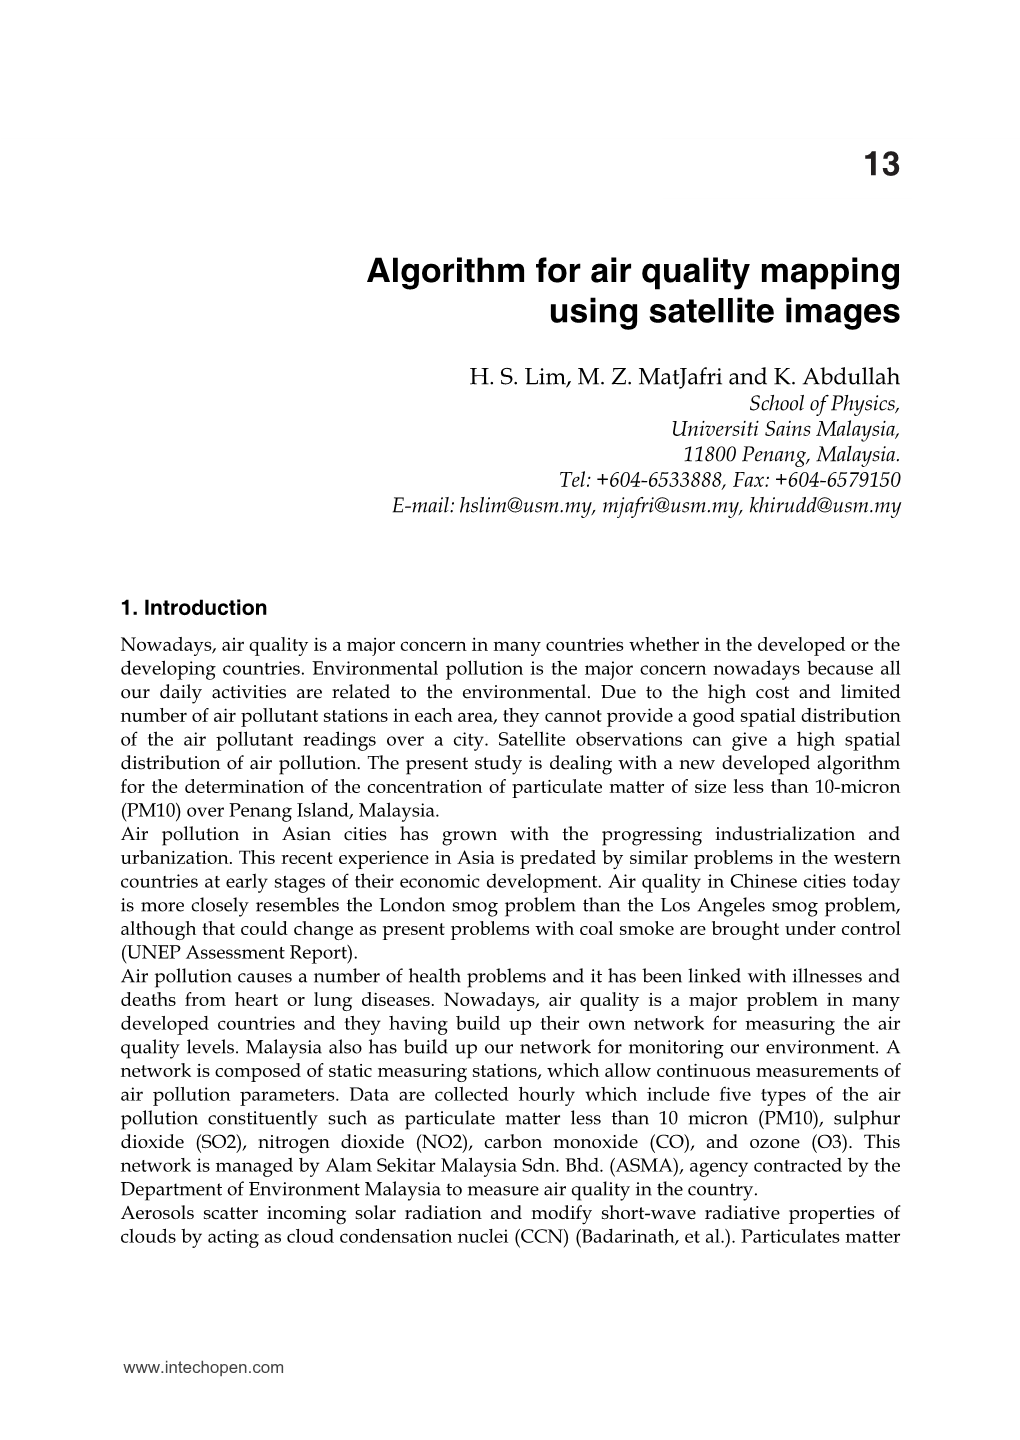 Algorithm for Air Quality Mapping Using Satellite Images 13X